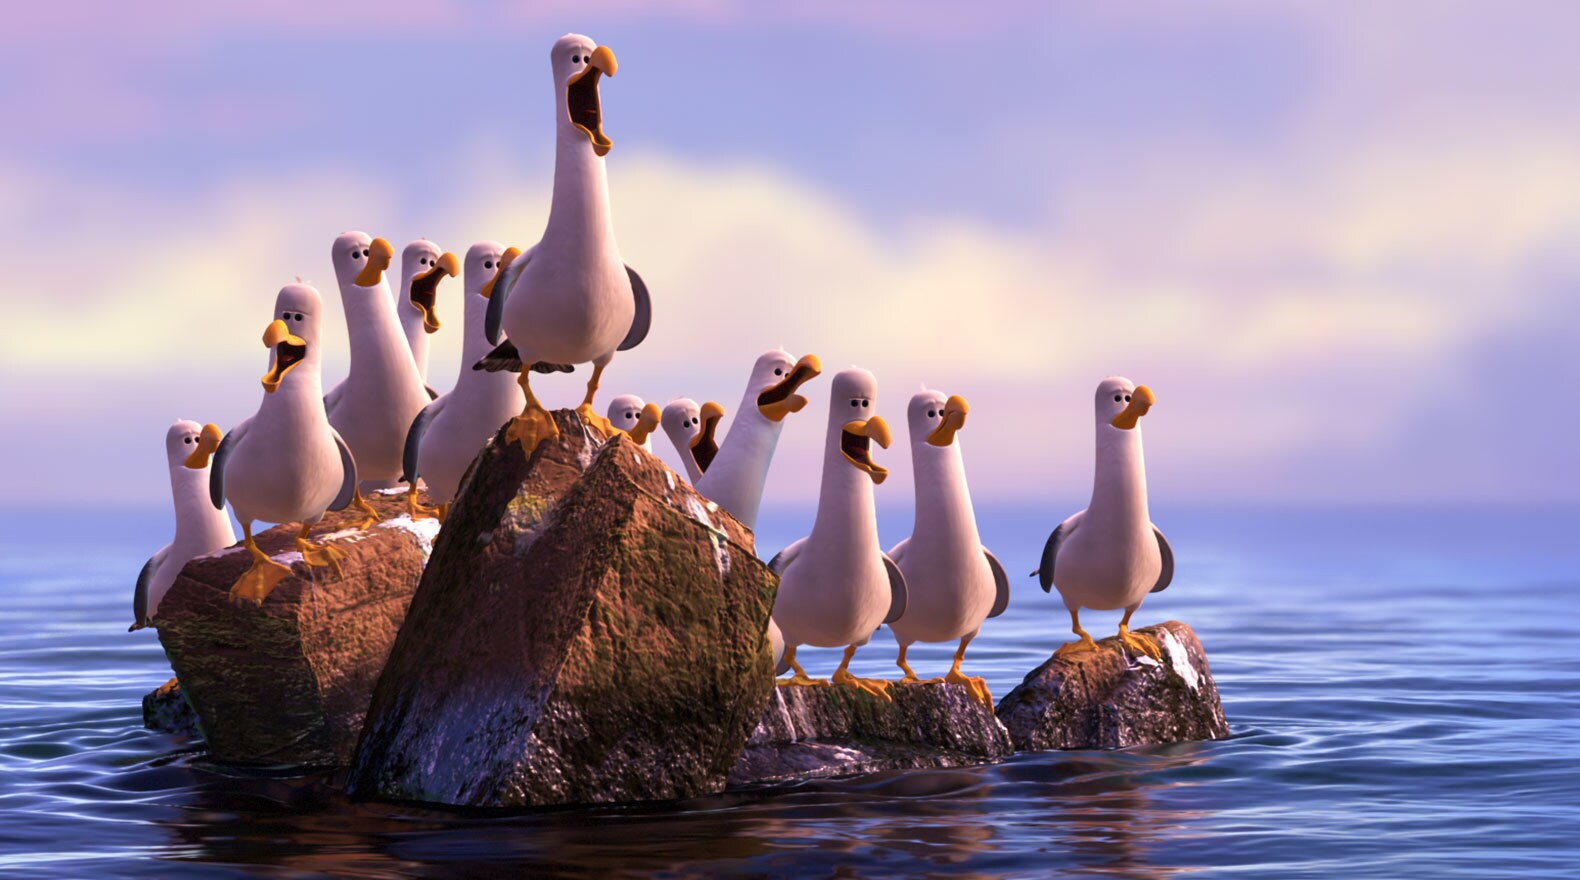 Seagulls sitting on rocks in the water in "Finding Nemo"